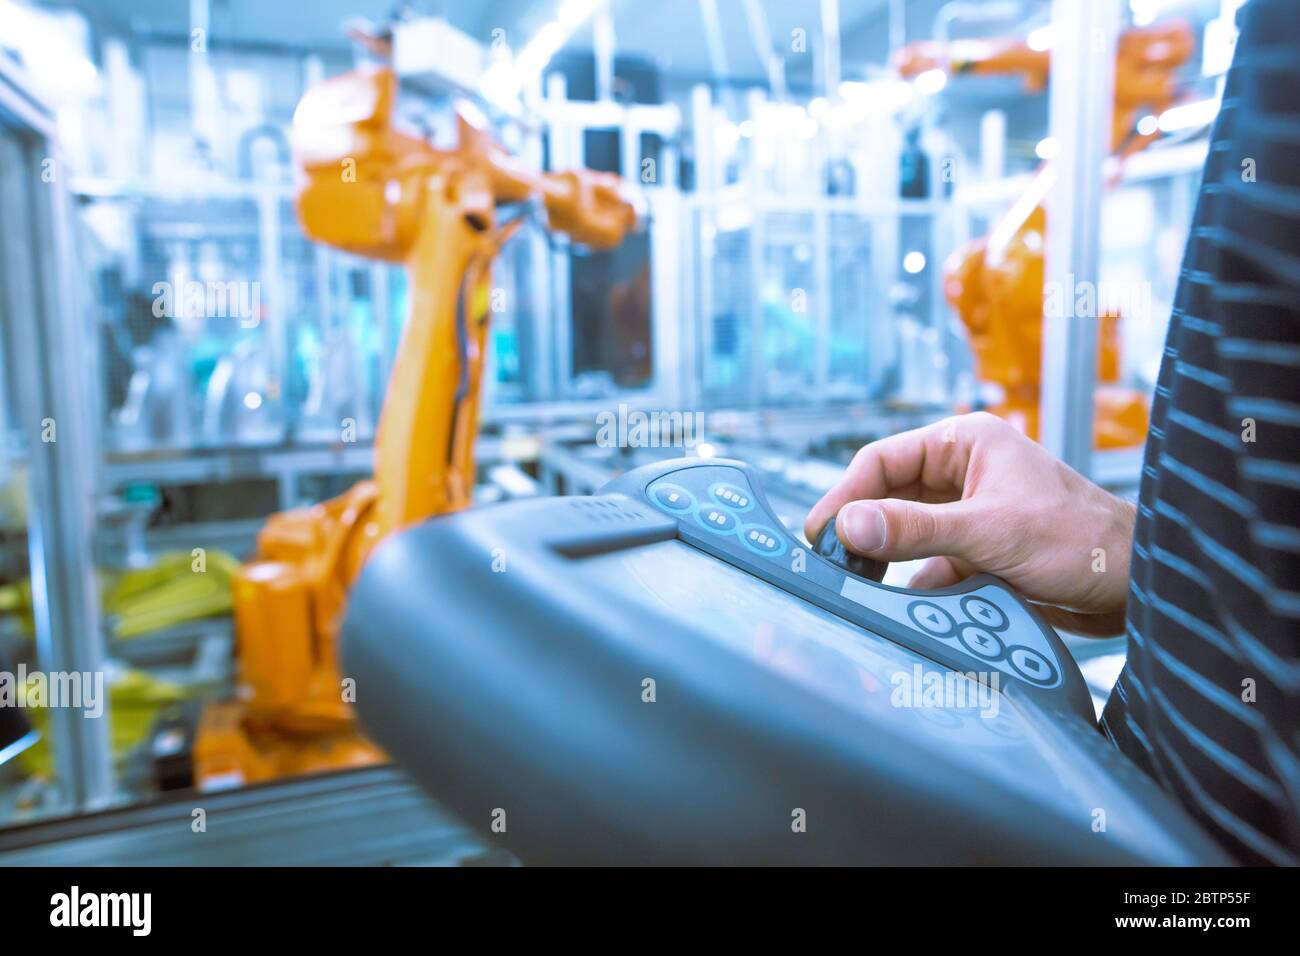 Young man programming industrial automatic robot in the automotive industry, industrial concept Stock Photo